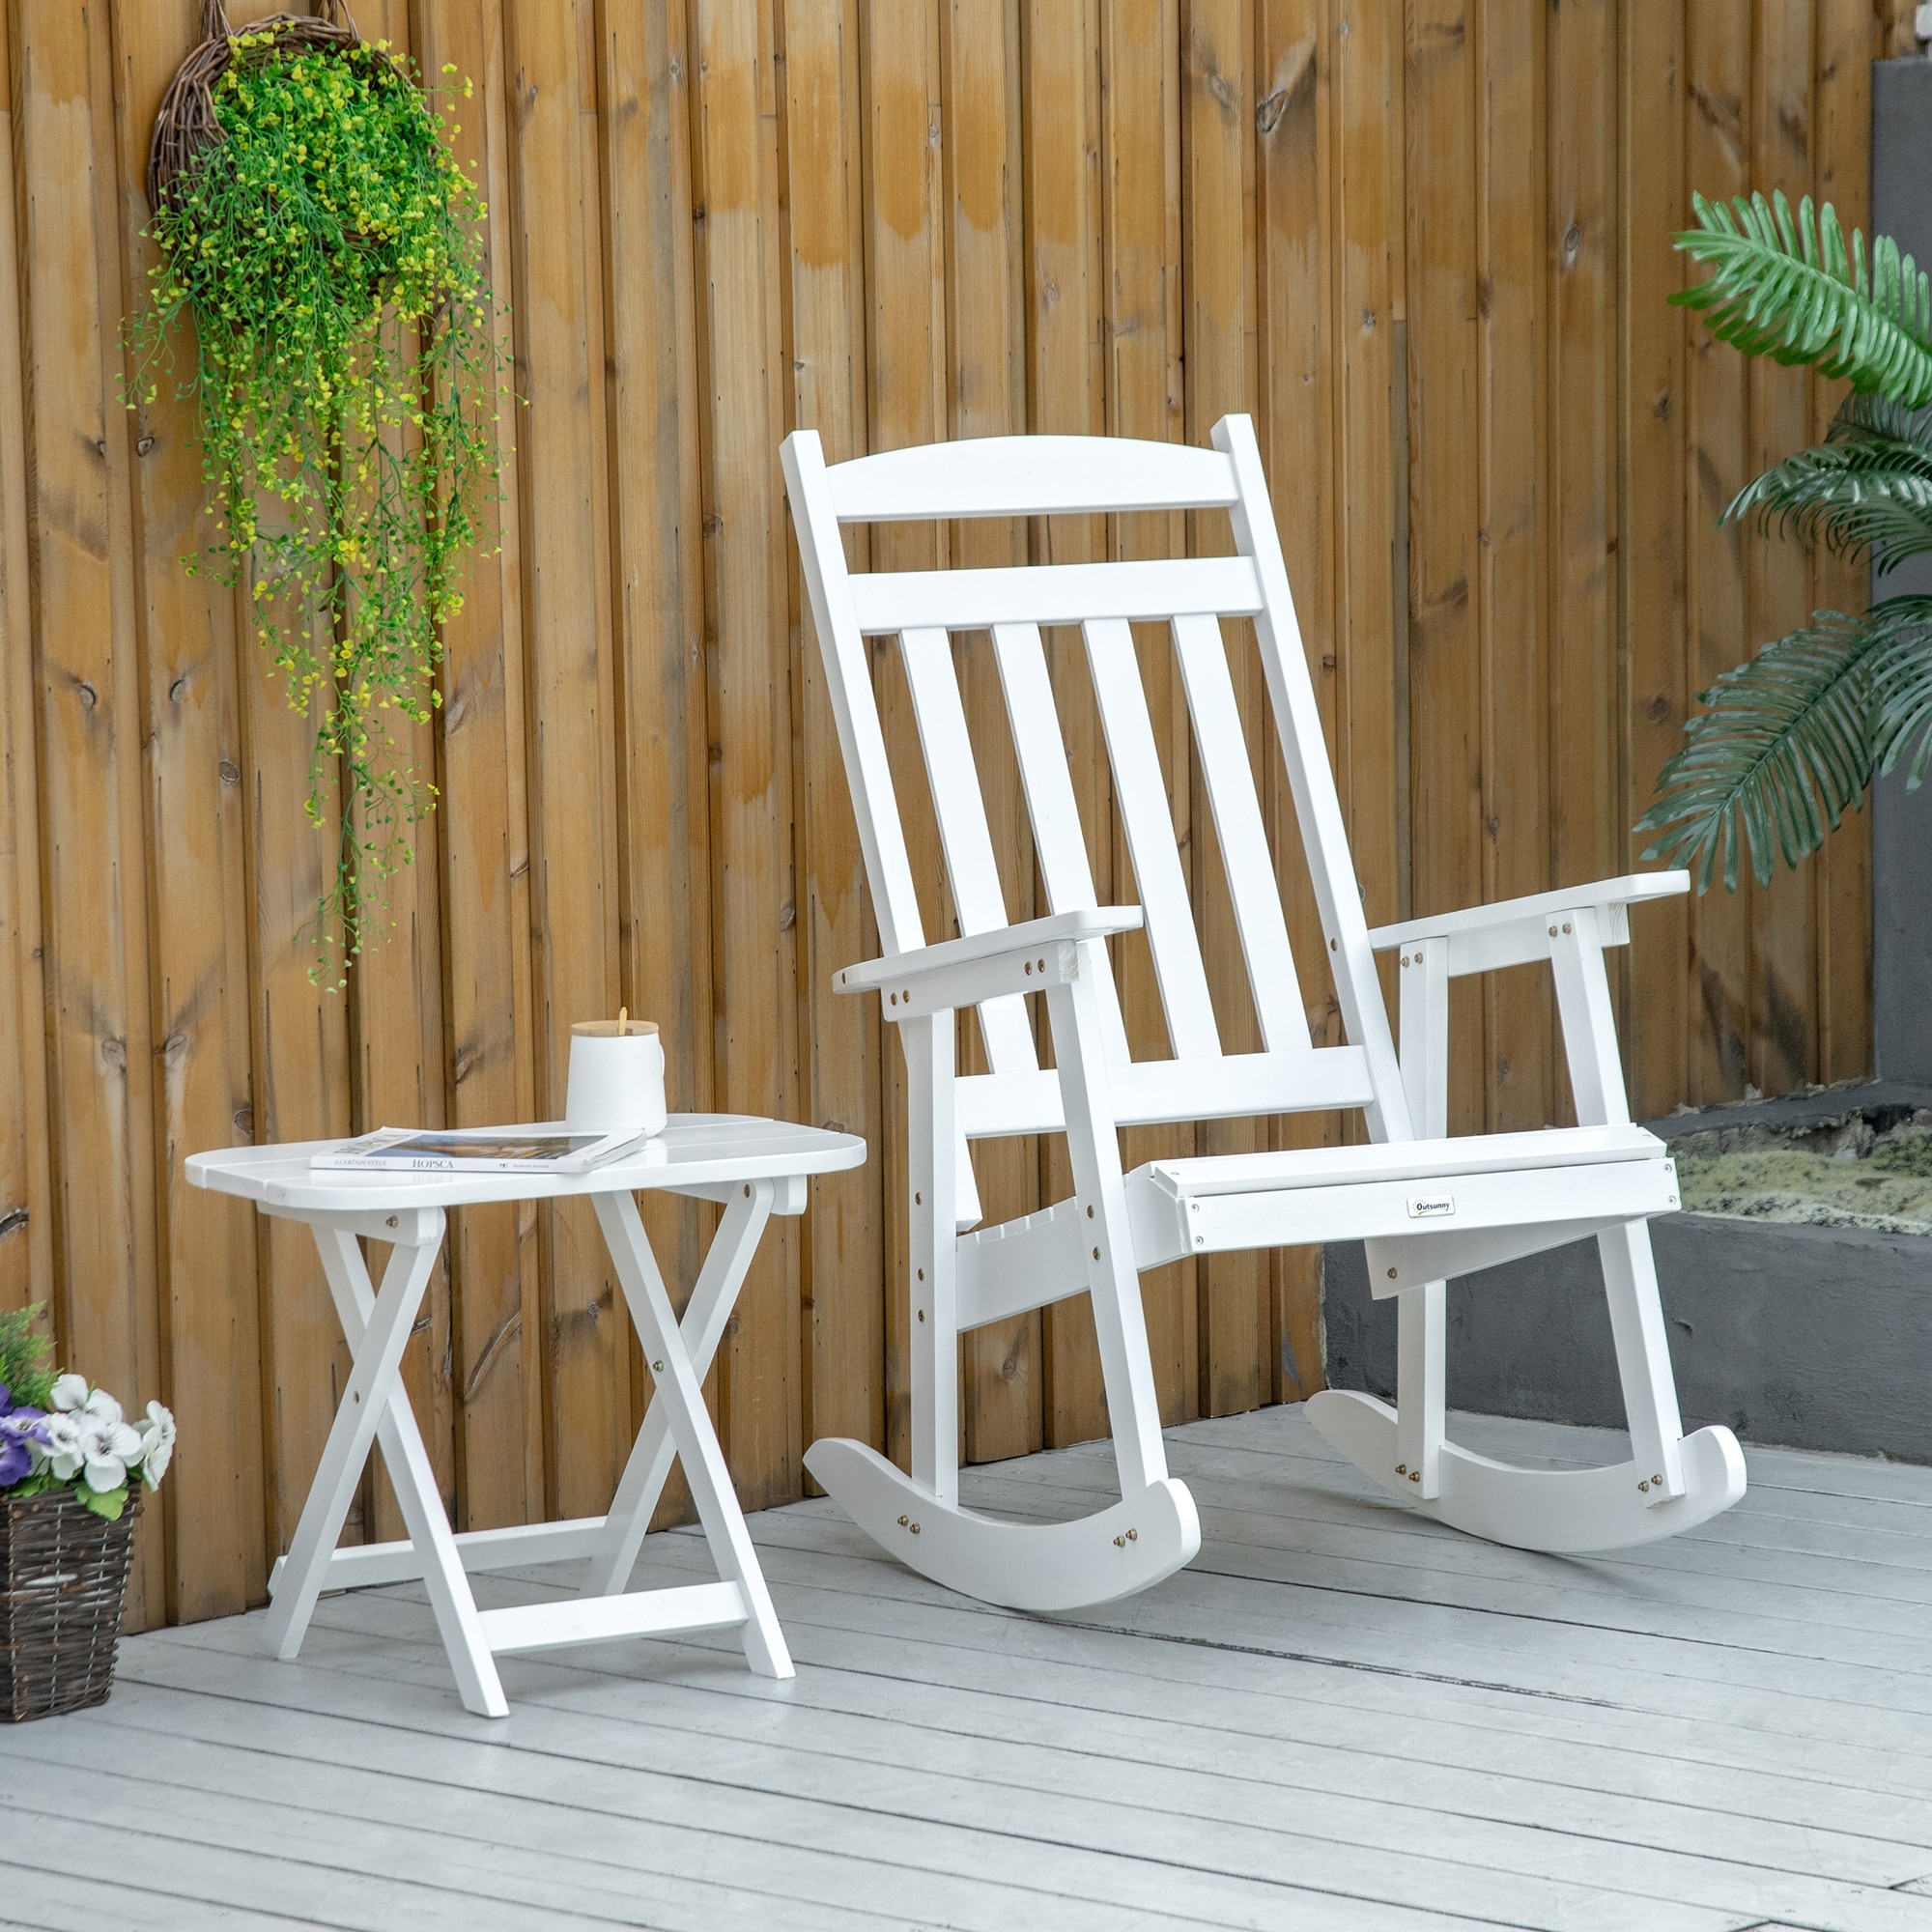 Outsunny Wooden Rocking Chair Set  2-piece Outdoor Porch Rocker With Foldable Table